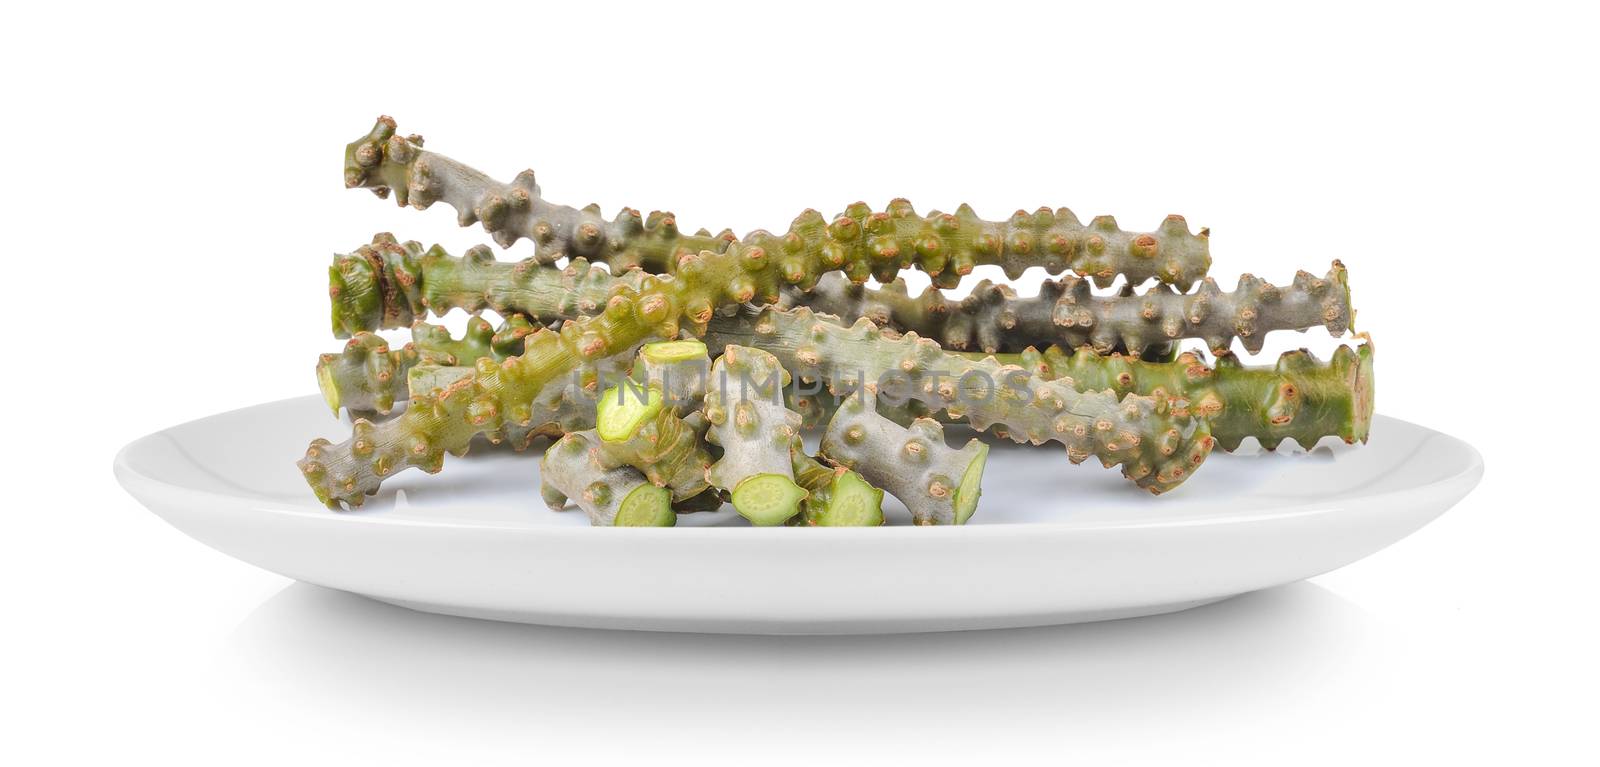 Tinospora cordifolia herb in plate isolated on white background by sommai